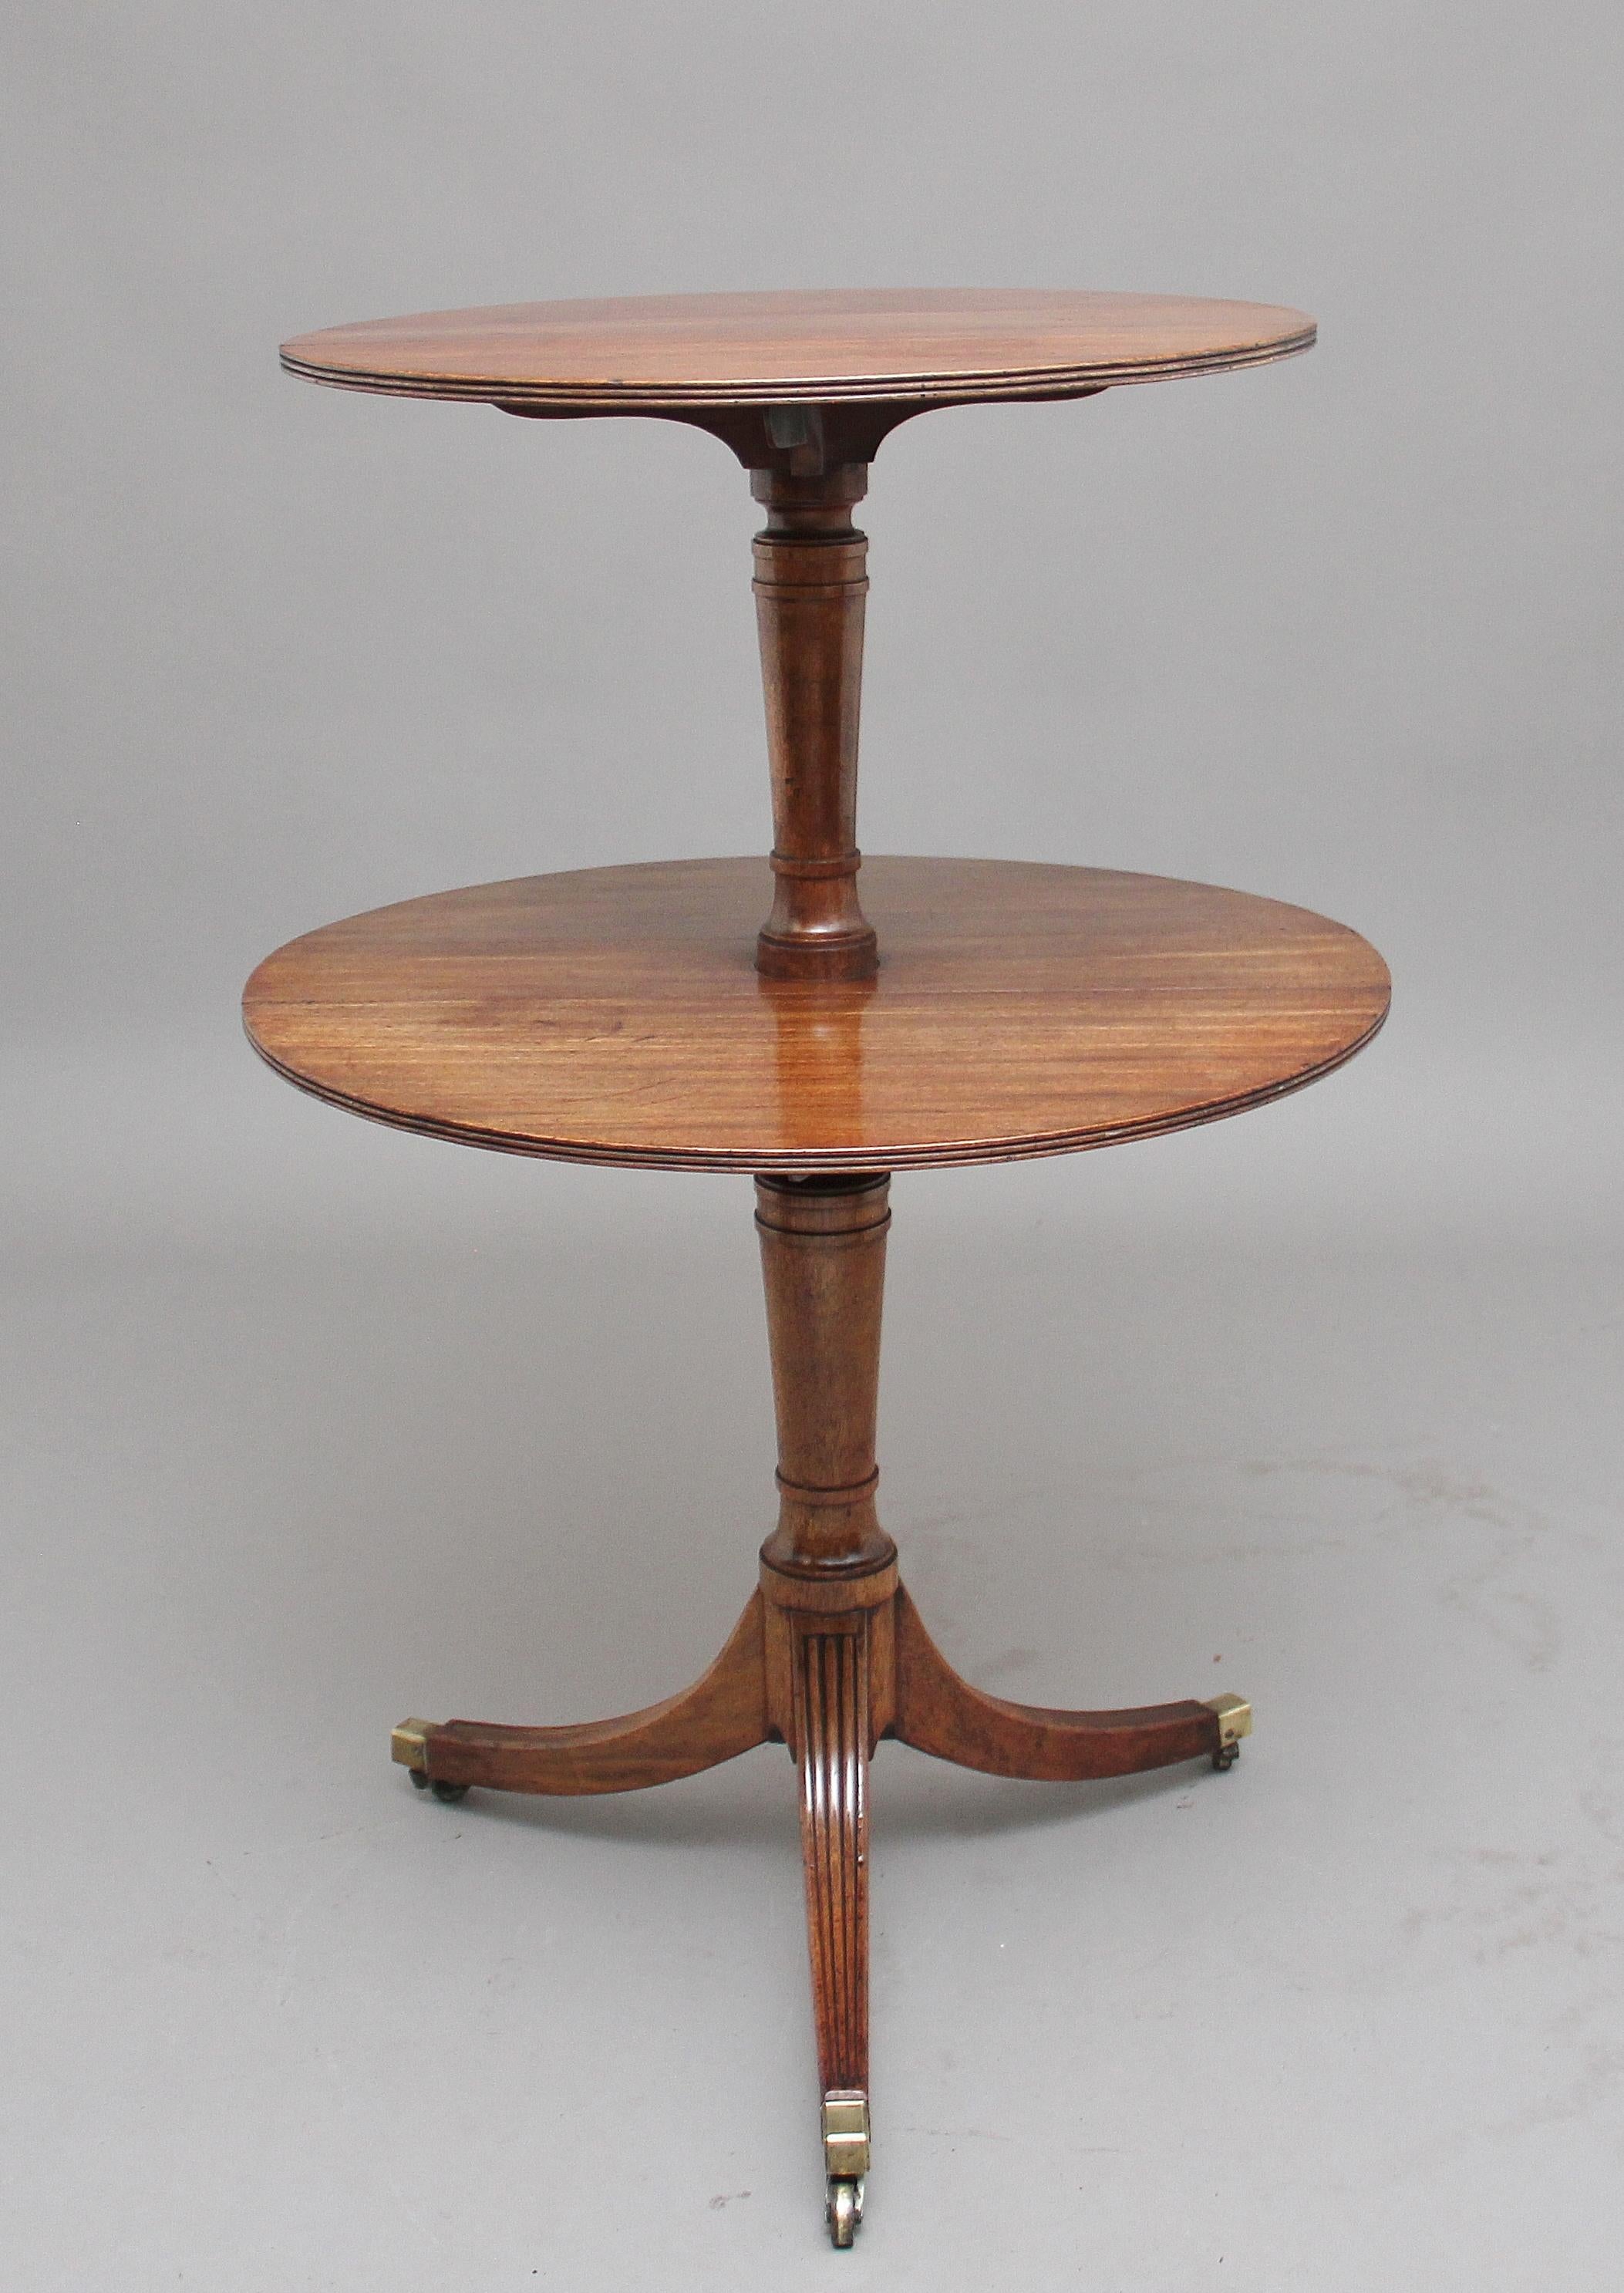 A rare and unusual Regency mahogany double drop leaf dumbwaiter, a smaller drop leaf above the larger opening up of circular form with a reeded edge, tapered columns supports with three reeded splayed legs terminating on brass cap and castors, circa